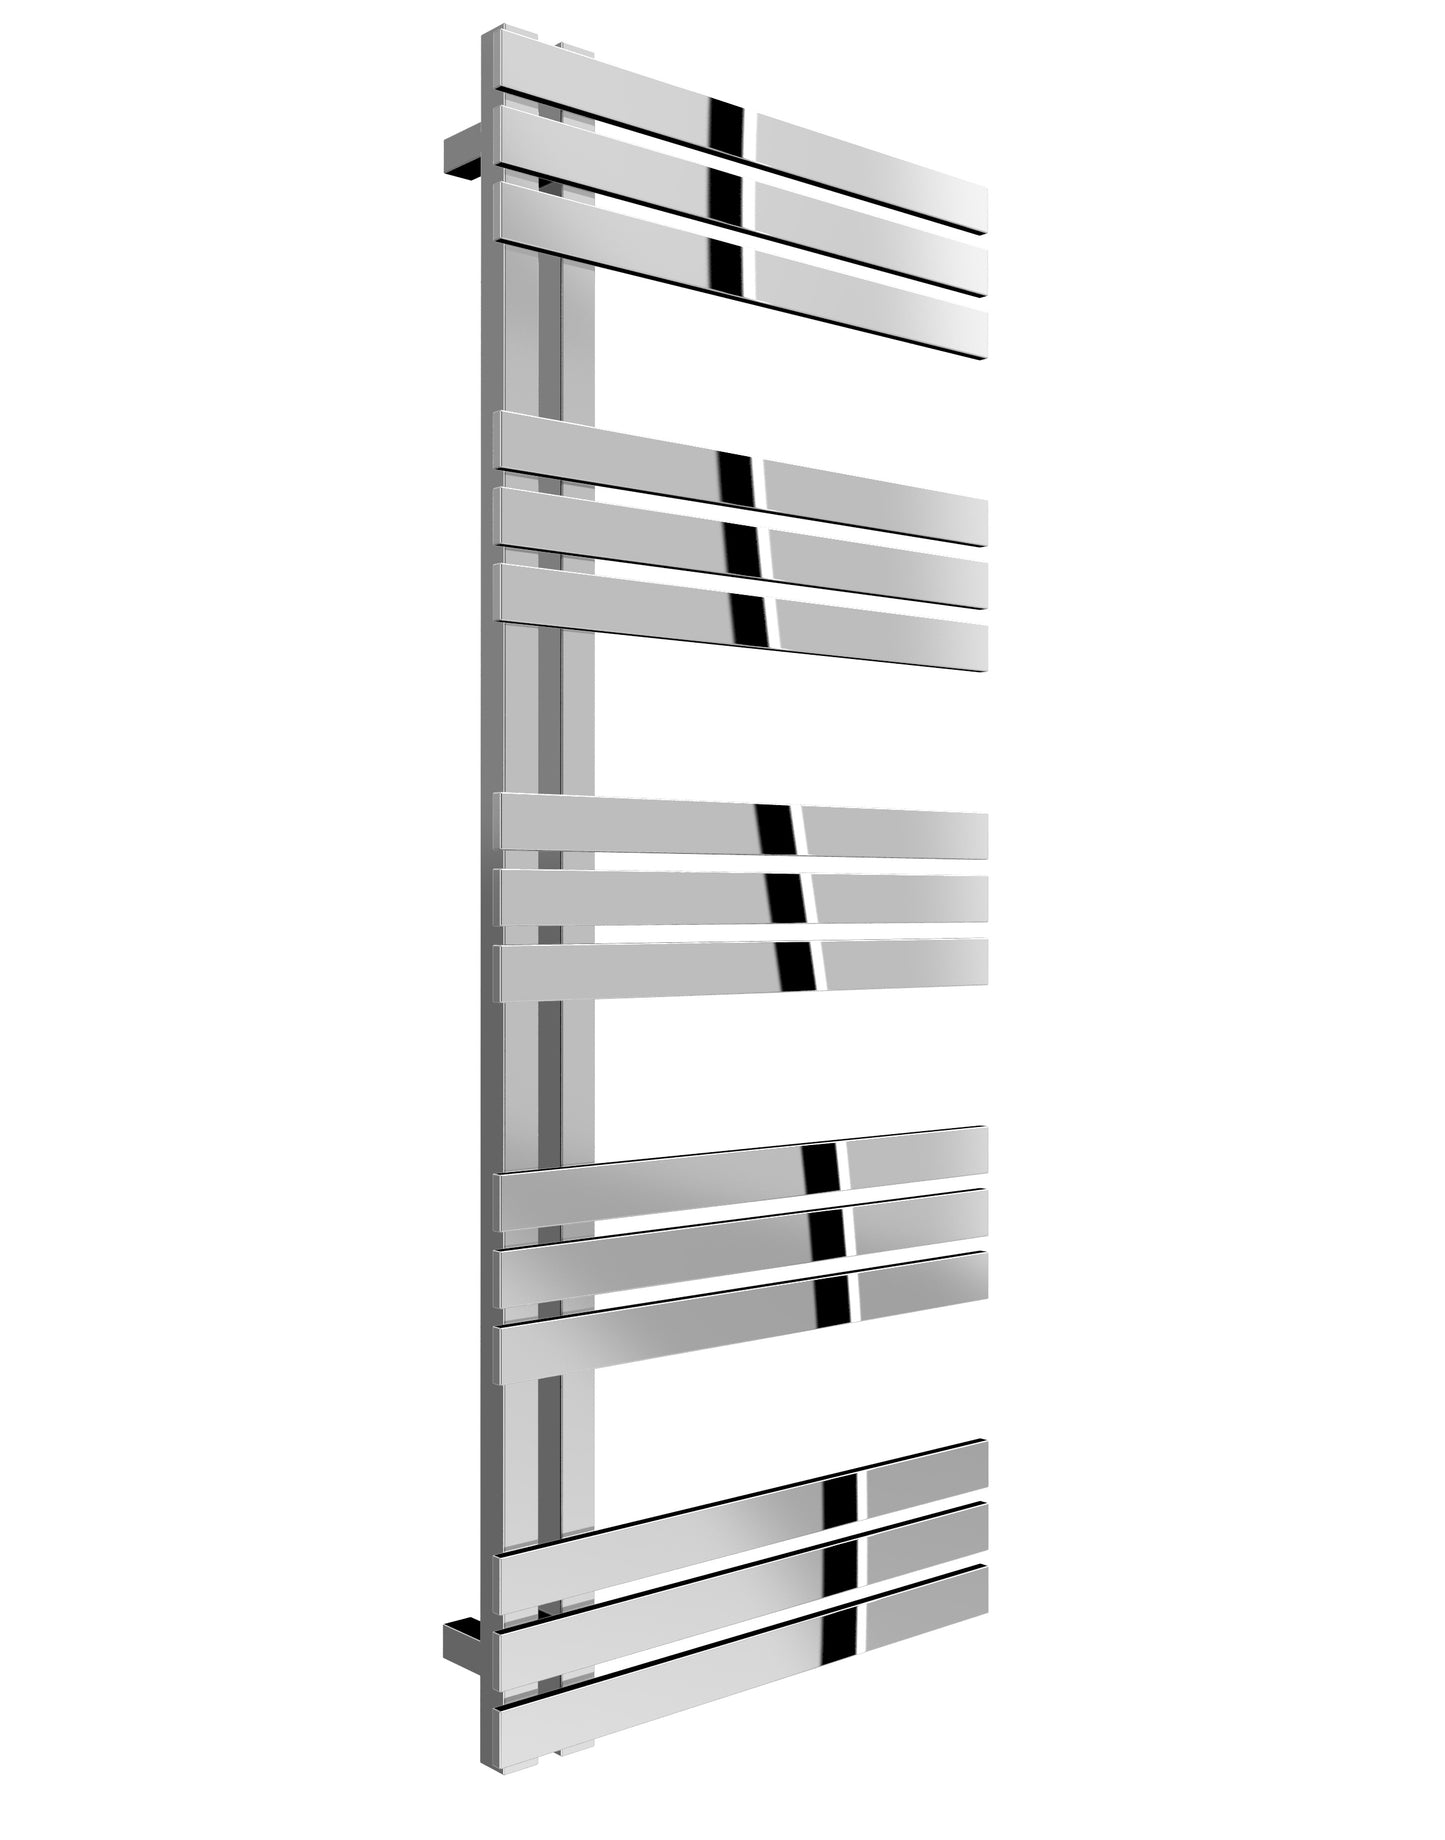 Lovere Dual Fuel Stainless Steel Heated Towel Rail - Various Sizes - Polished Stainless Steel